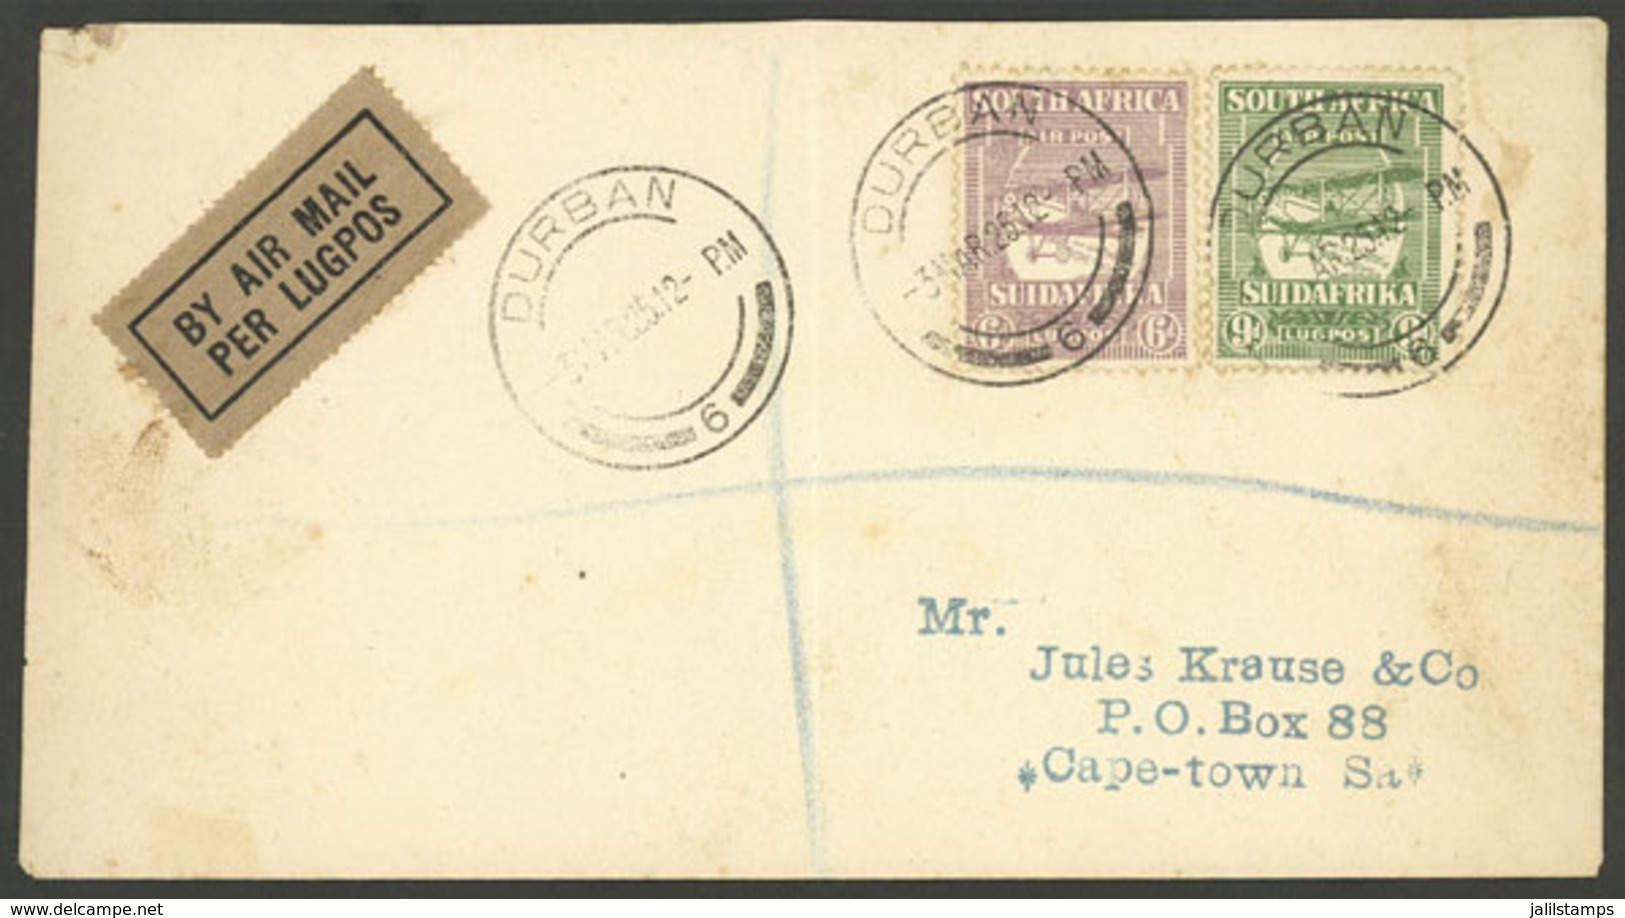 SOUTH AFRICA: 3/MAR/1925 Durban - Cape Town, First Flight, Cover Franked By Sc.CC3 + C4, Arrival Backstamp, Very Nice! - Ohne Zuordnung